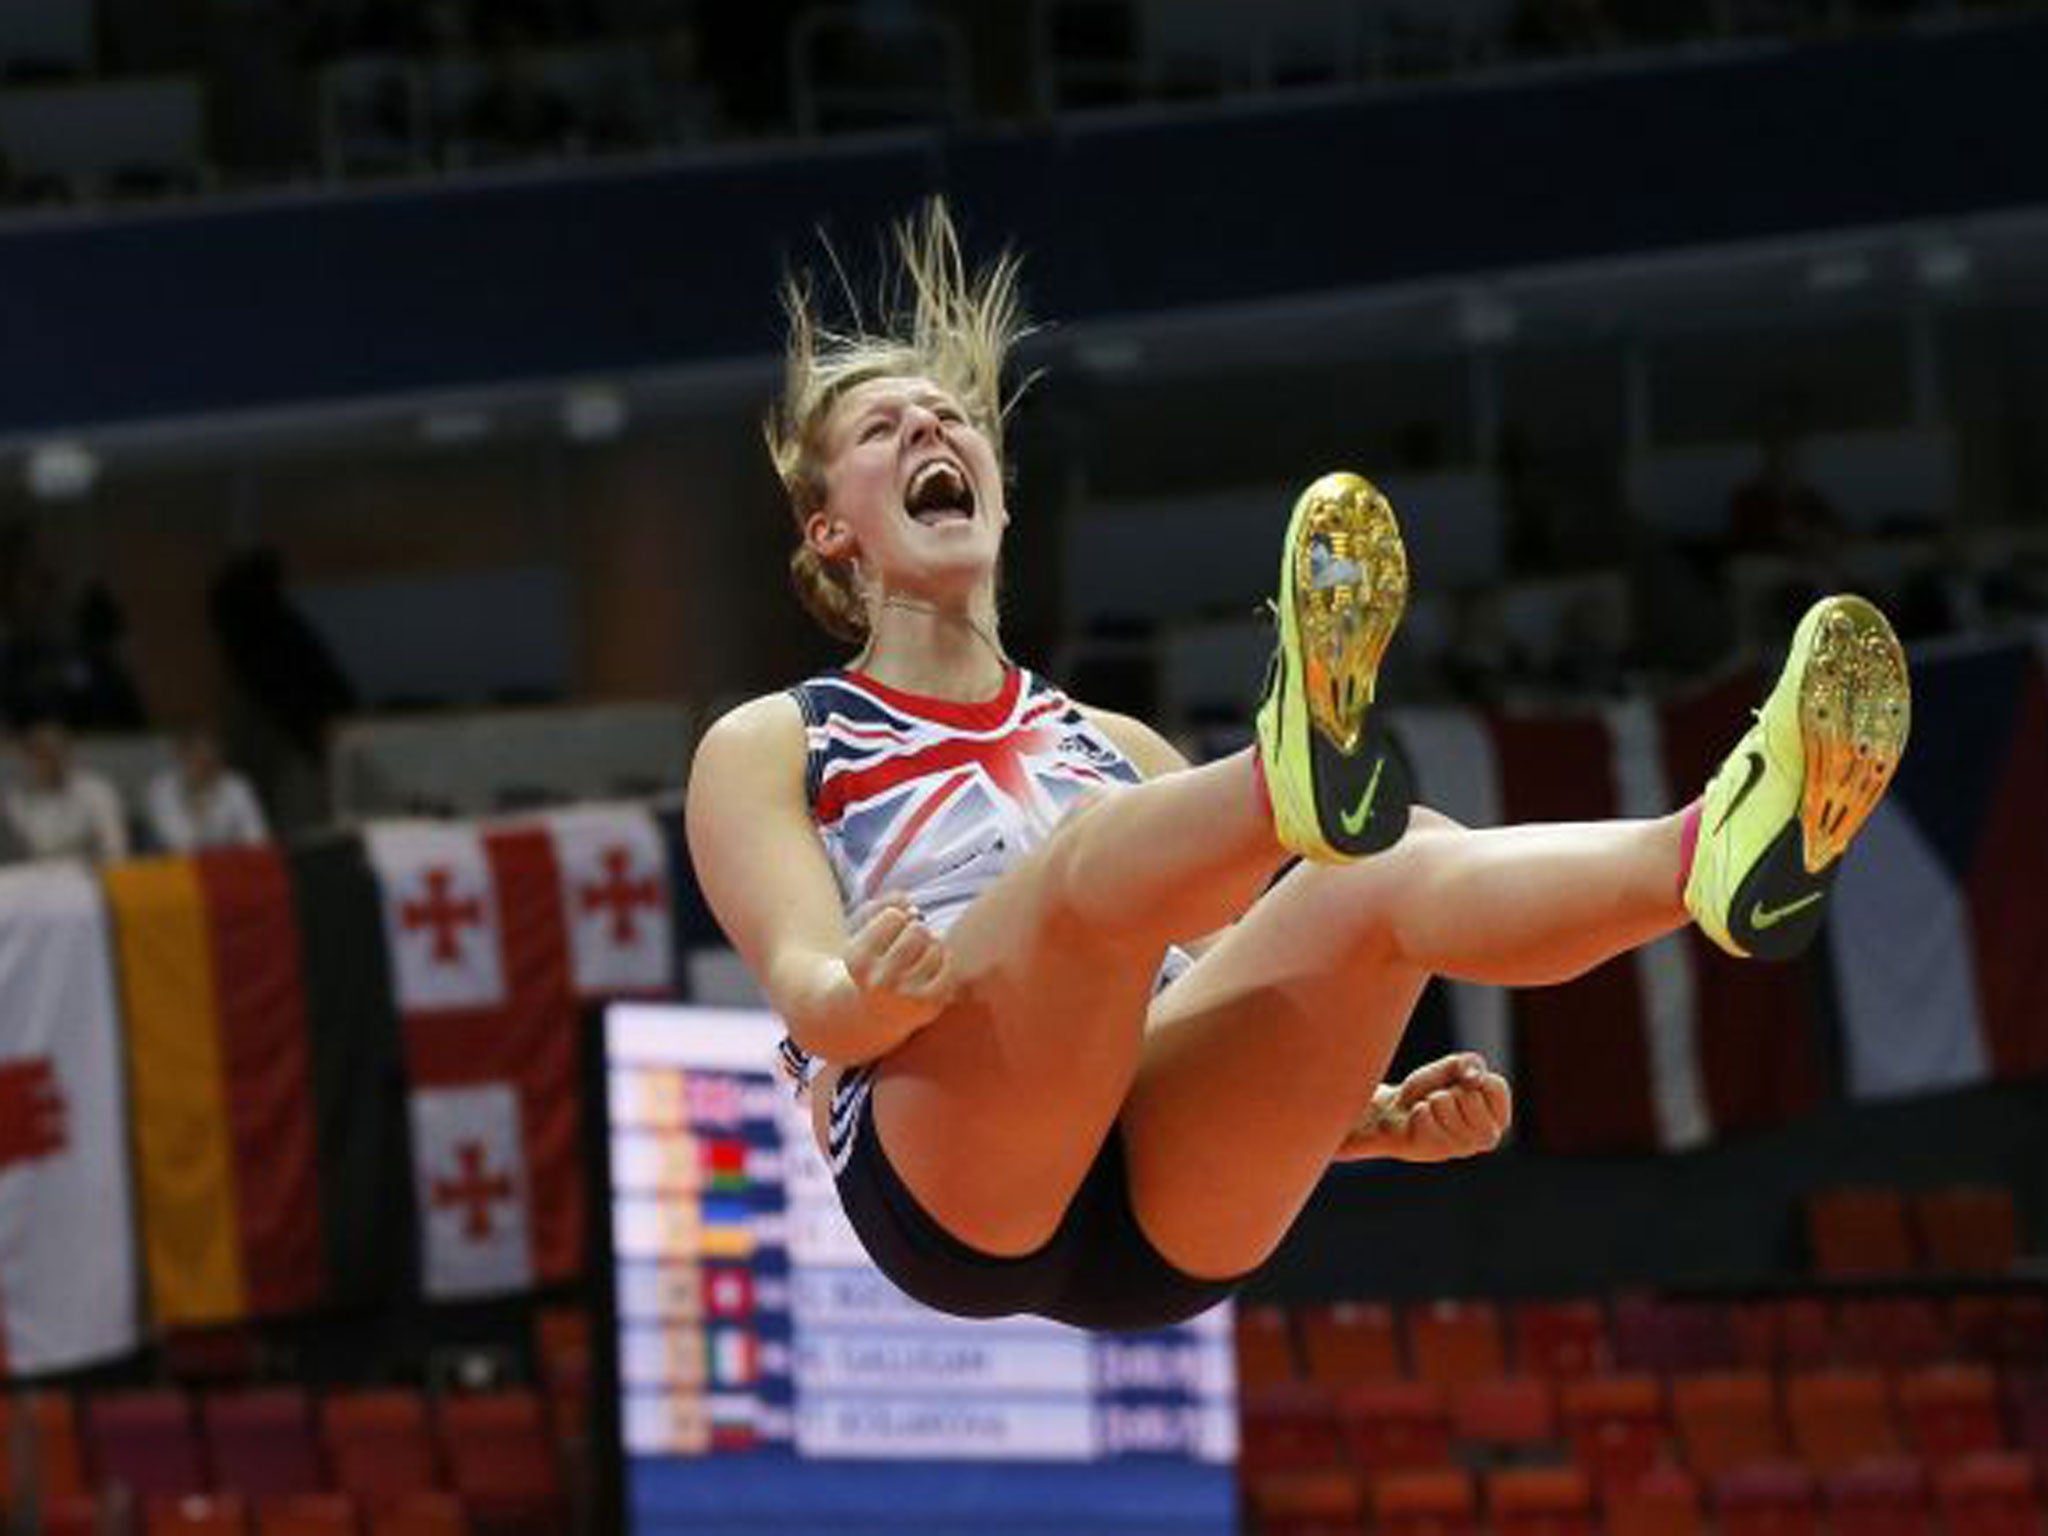 Bleasdale was distraught at London 2012 but was walking on air yesterday as she took world indoor gold reuter